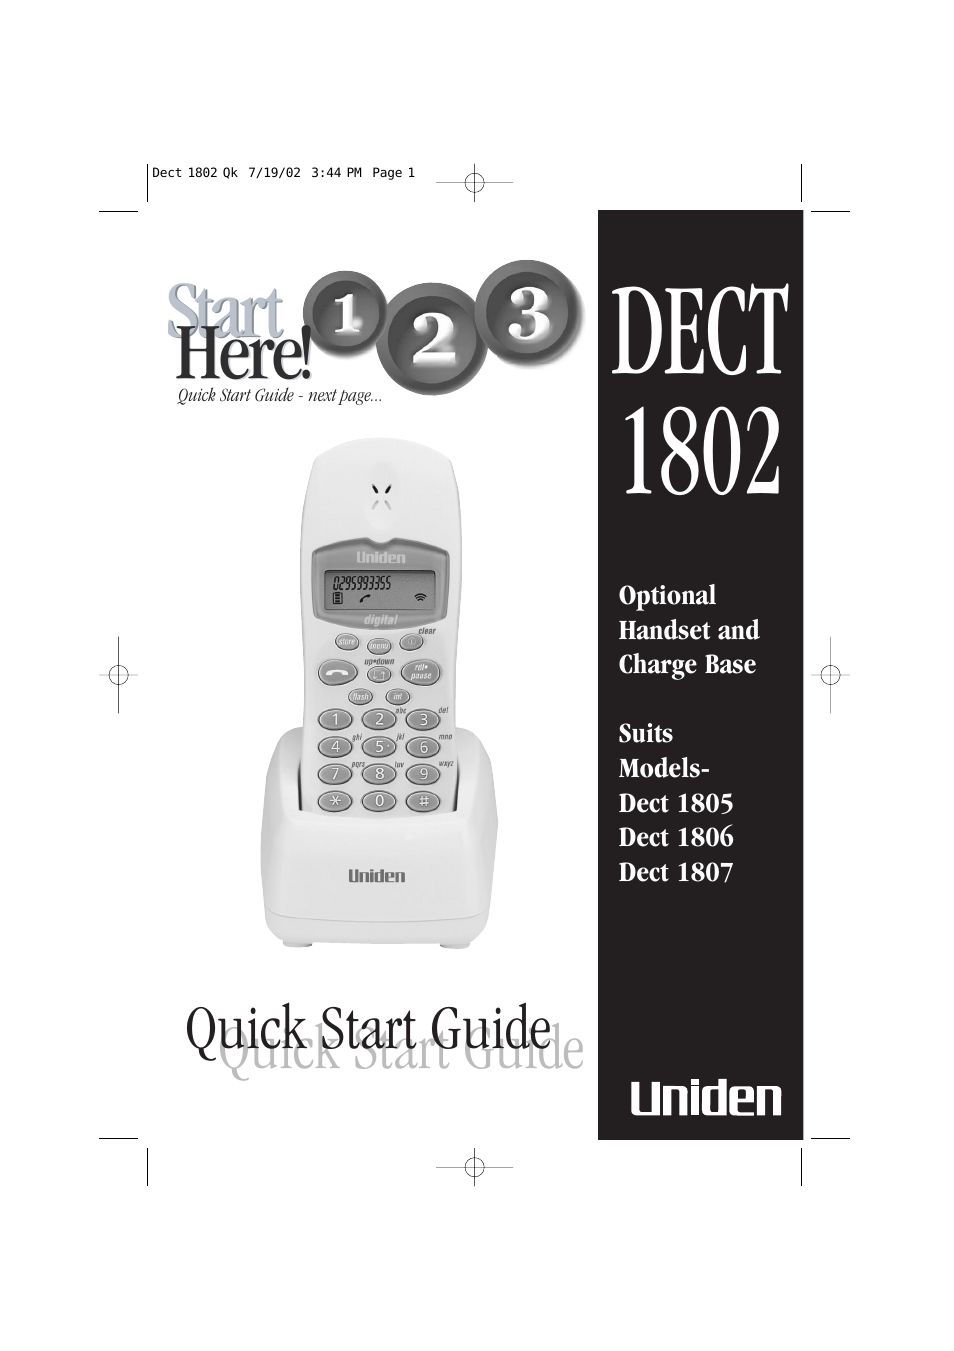 DECT 1806 (Page 1)